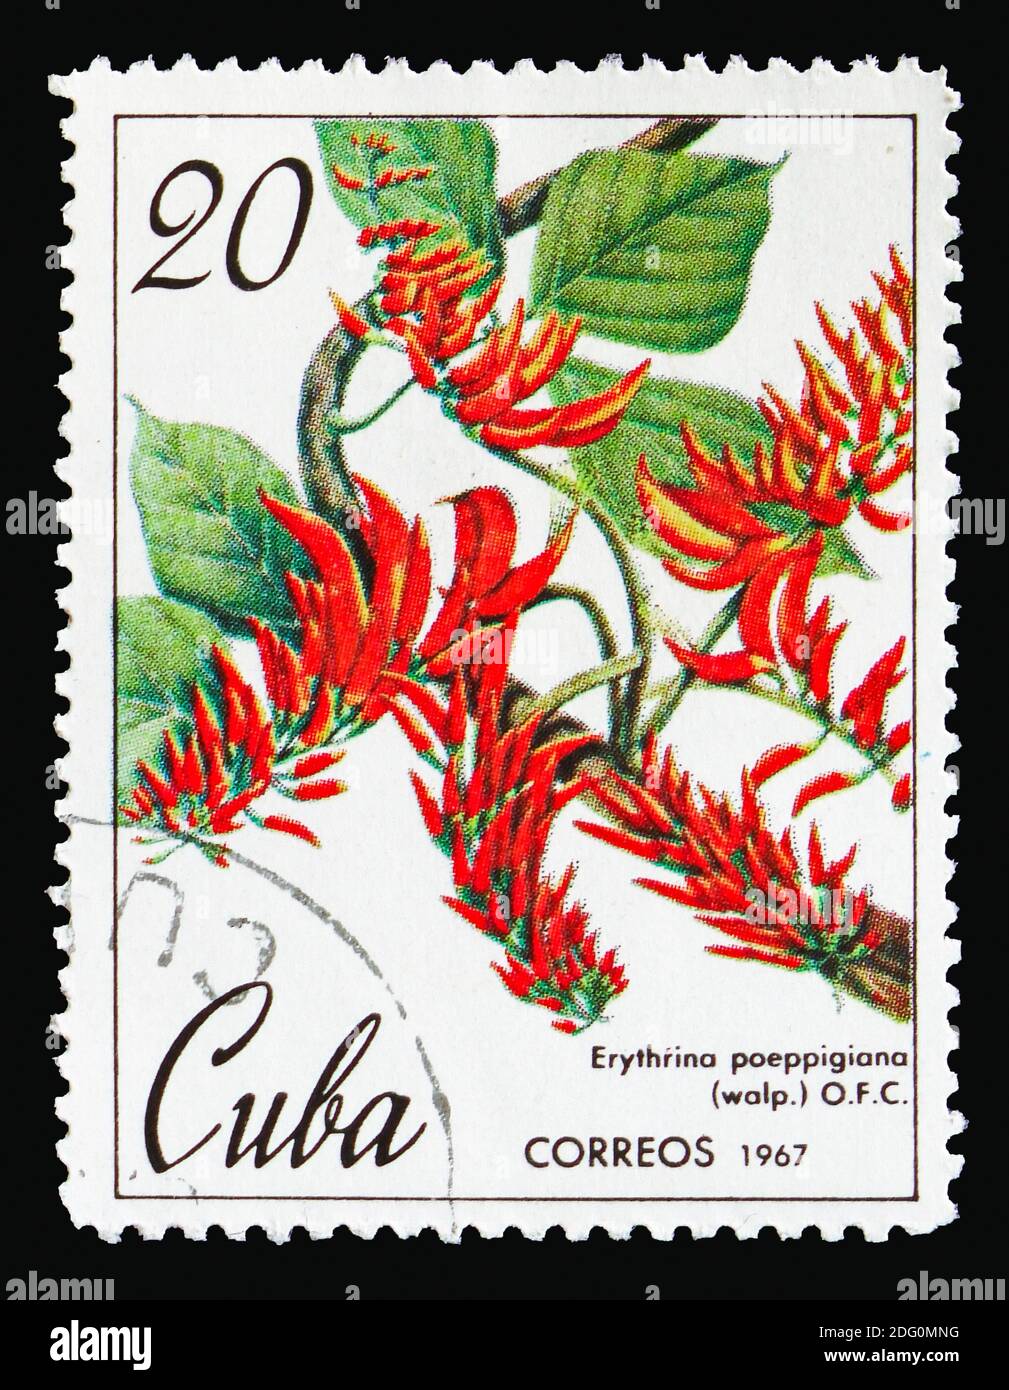 MOSCOW, RUSSIA - AUGUST 18, 2018: A stamp printed in Cuba shows Erythrina poeppigiana, Botanical Gardens in Cuba serie, circa 1967 Stock Photo